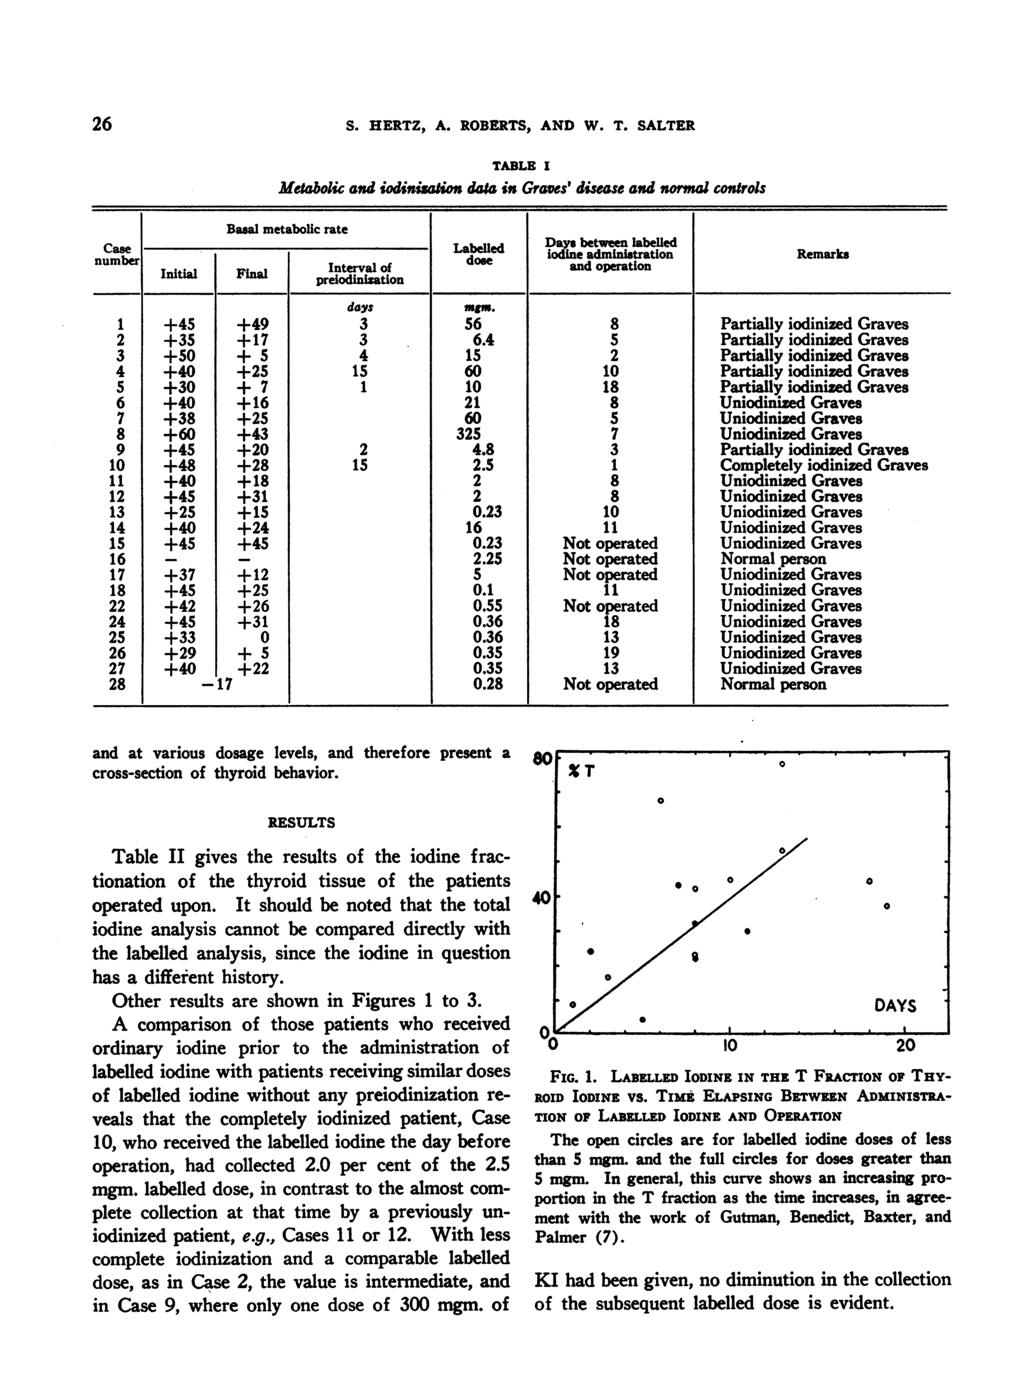 26 S HERTZ, A ROBERTS, AND W T SALTER Basa TABLE I Metabolc and oinisation daa in Graves' disease and normal controls metabolic rate Case Labe ed Days between labelled number lled iodie